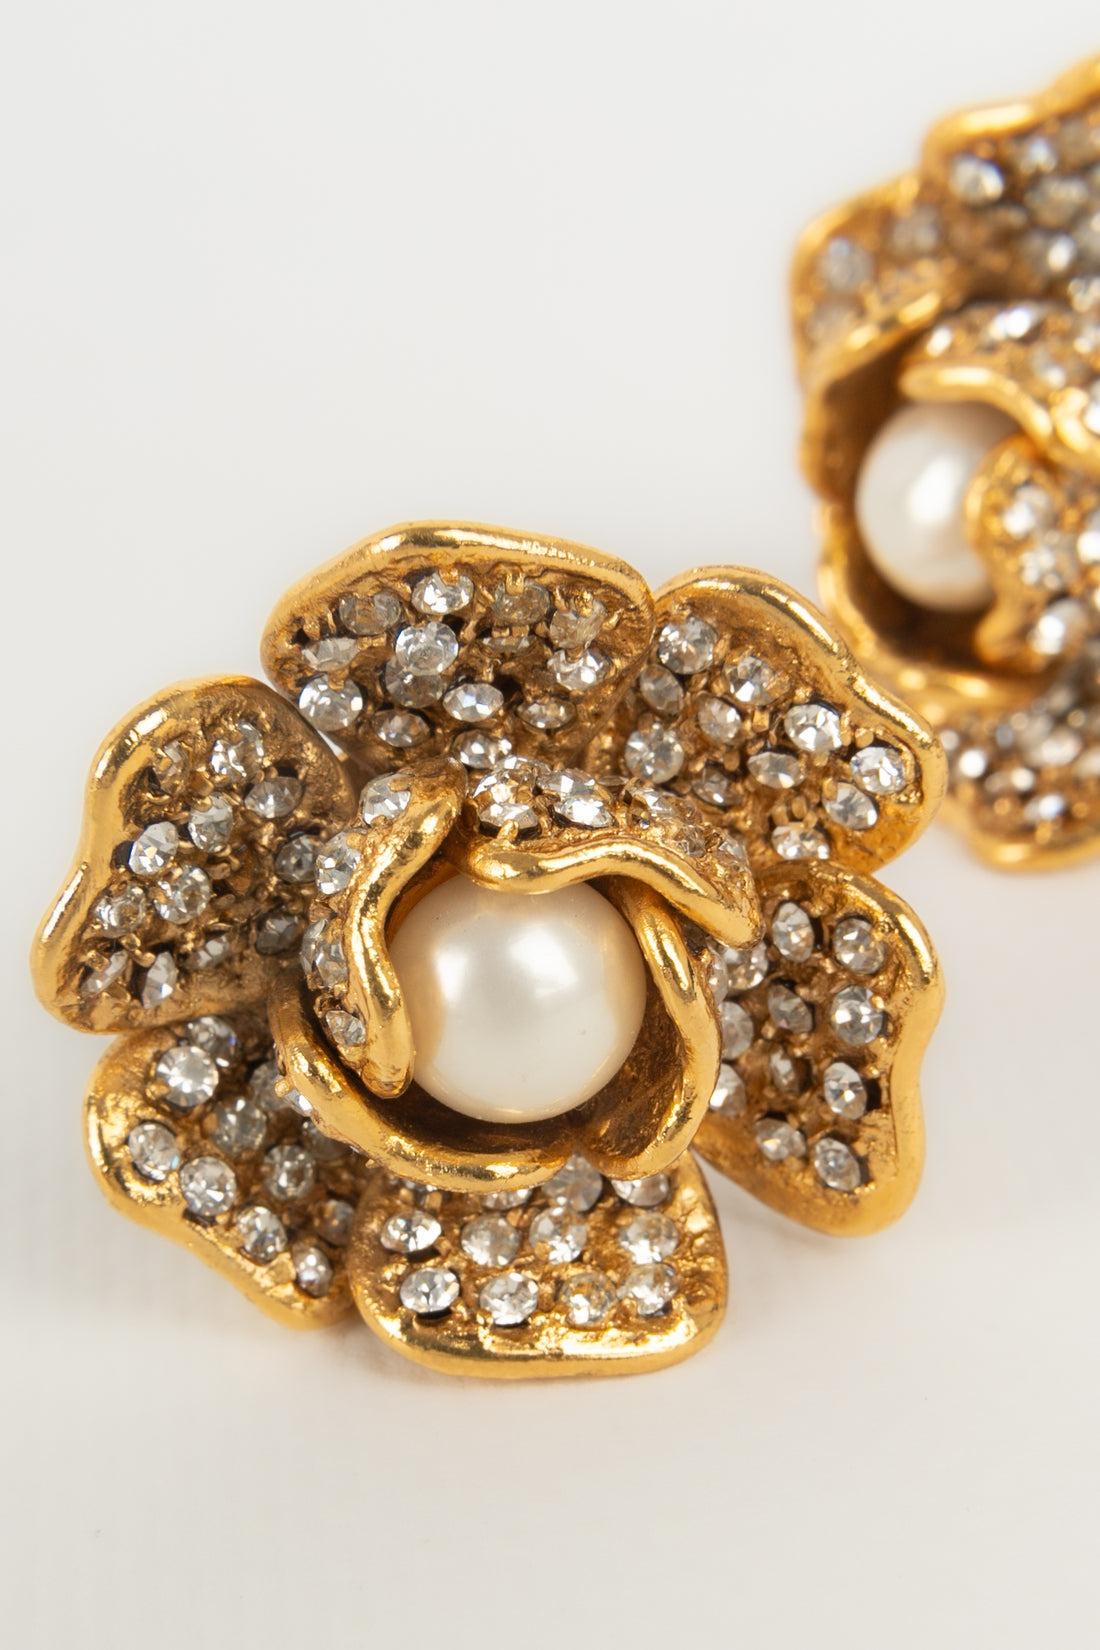 Chanel - (Made in France) Golden metal camellia earrings ornamented with rhinestones and a central pearly cabochon. Fall-Winter 1997 Collection.

Additional information:
Condition: Very good condition
Dimensions: Height: 4 cm
Period: 20th